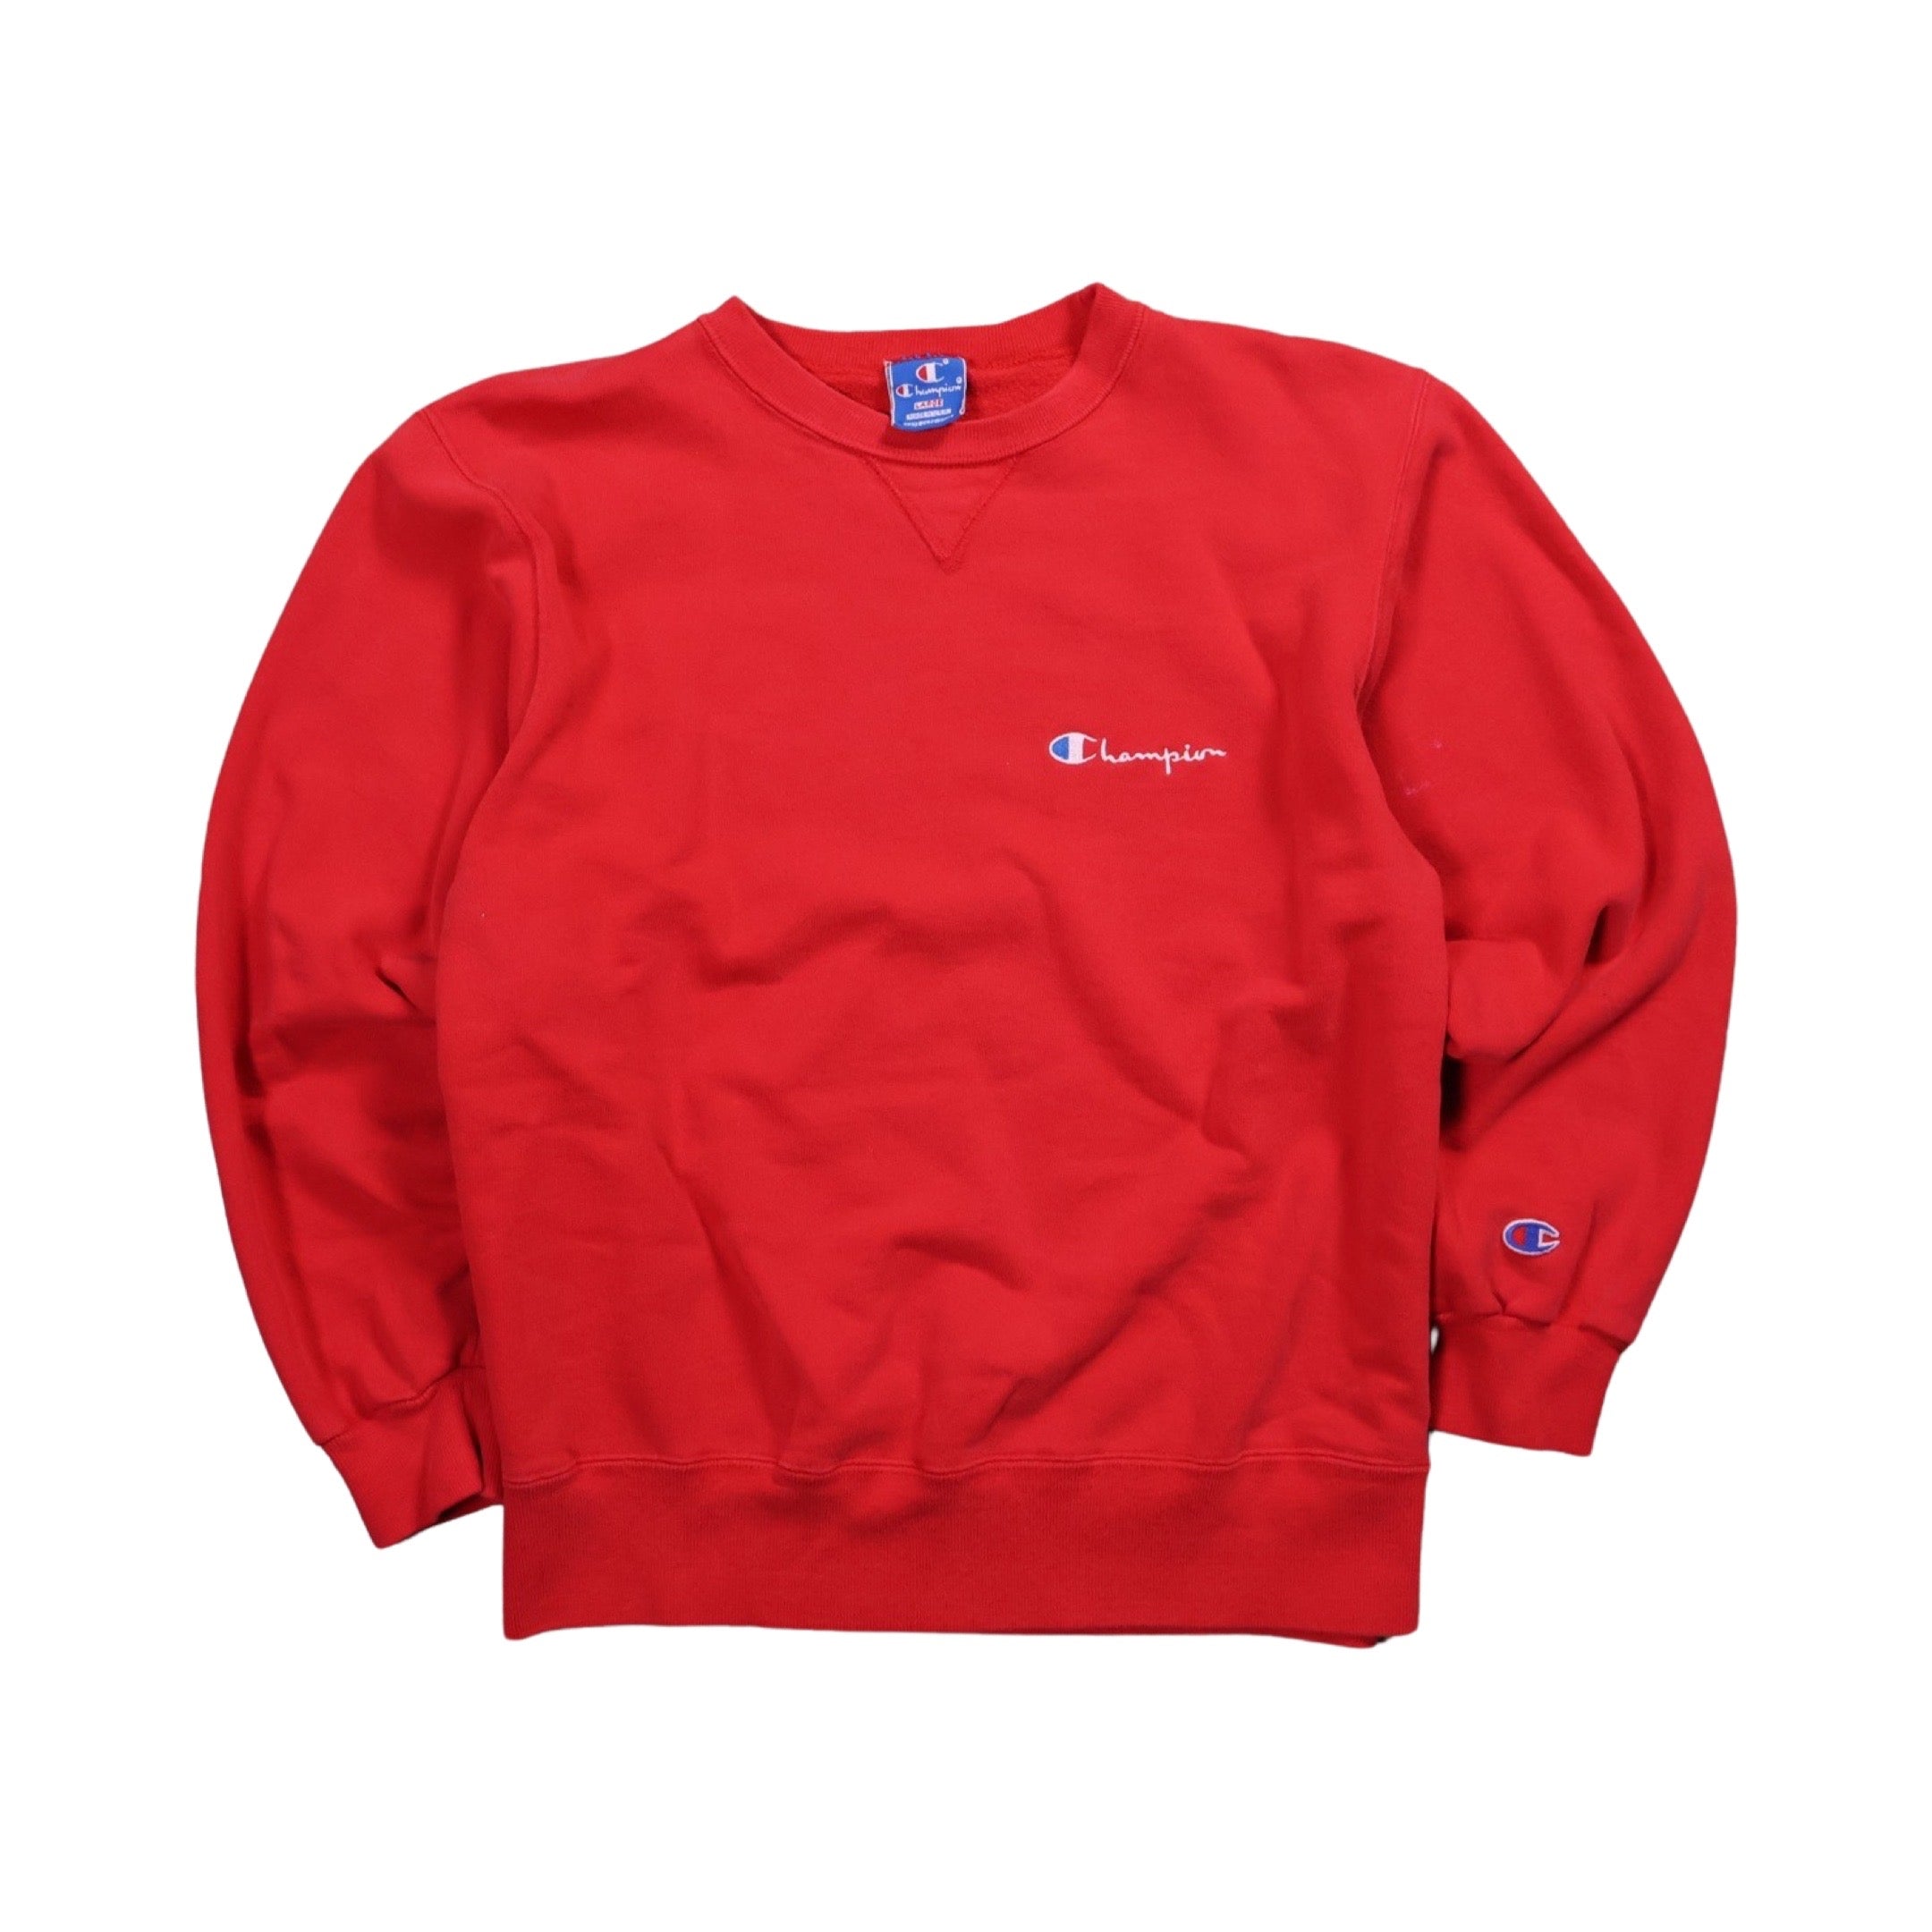 Red Champion 90s Spellout Sweater (Small)